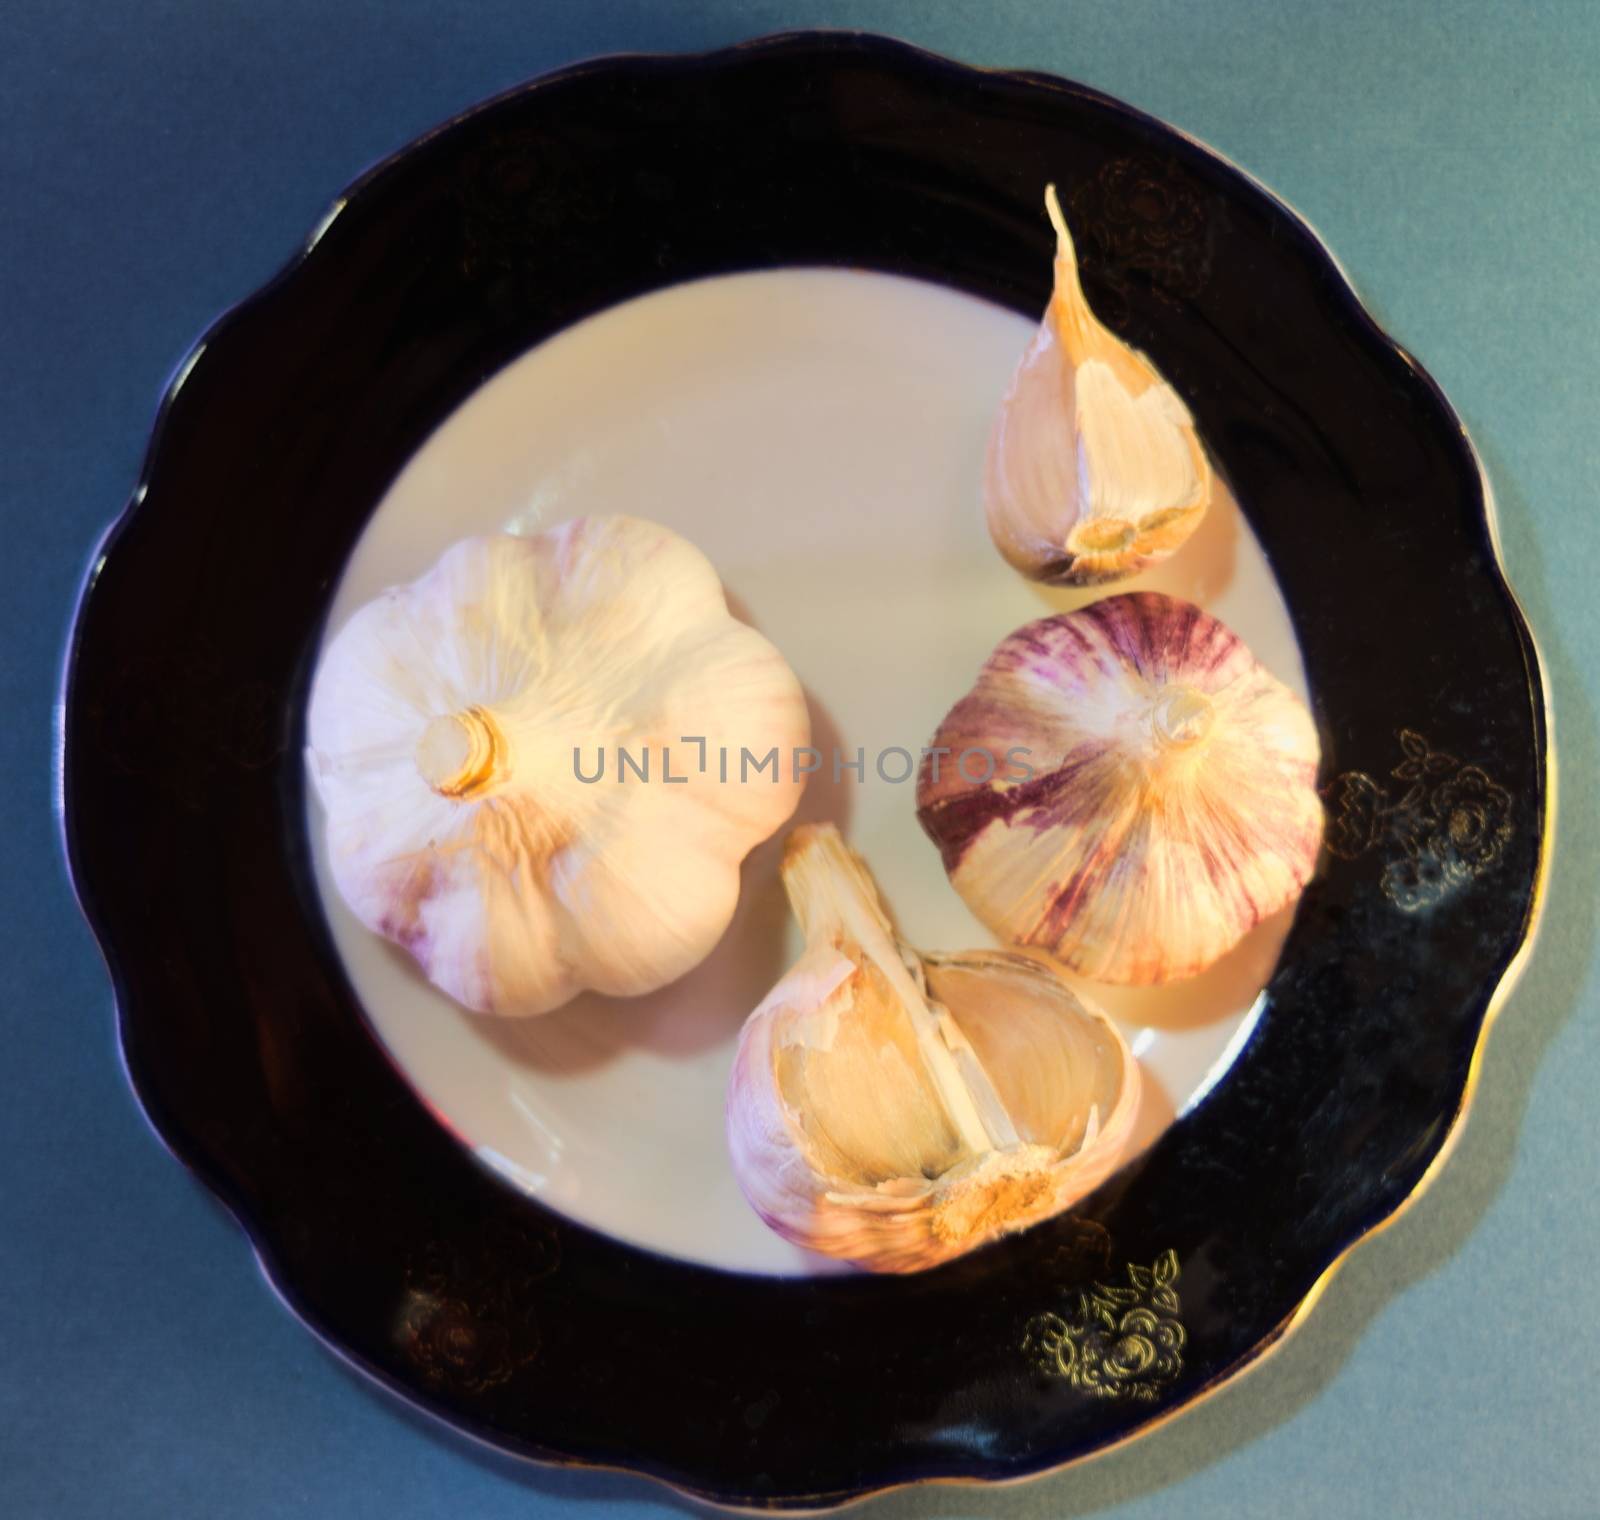 top view of a composition of young garlic heads on a black and white plate, background - blue